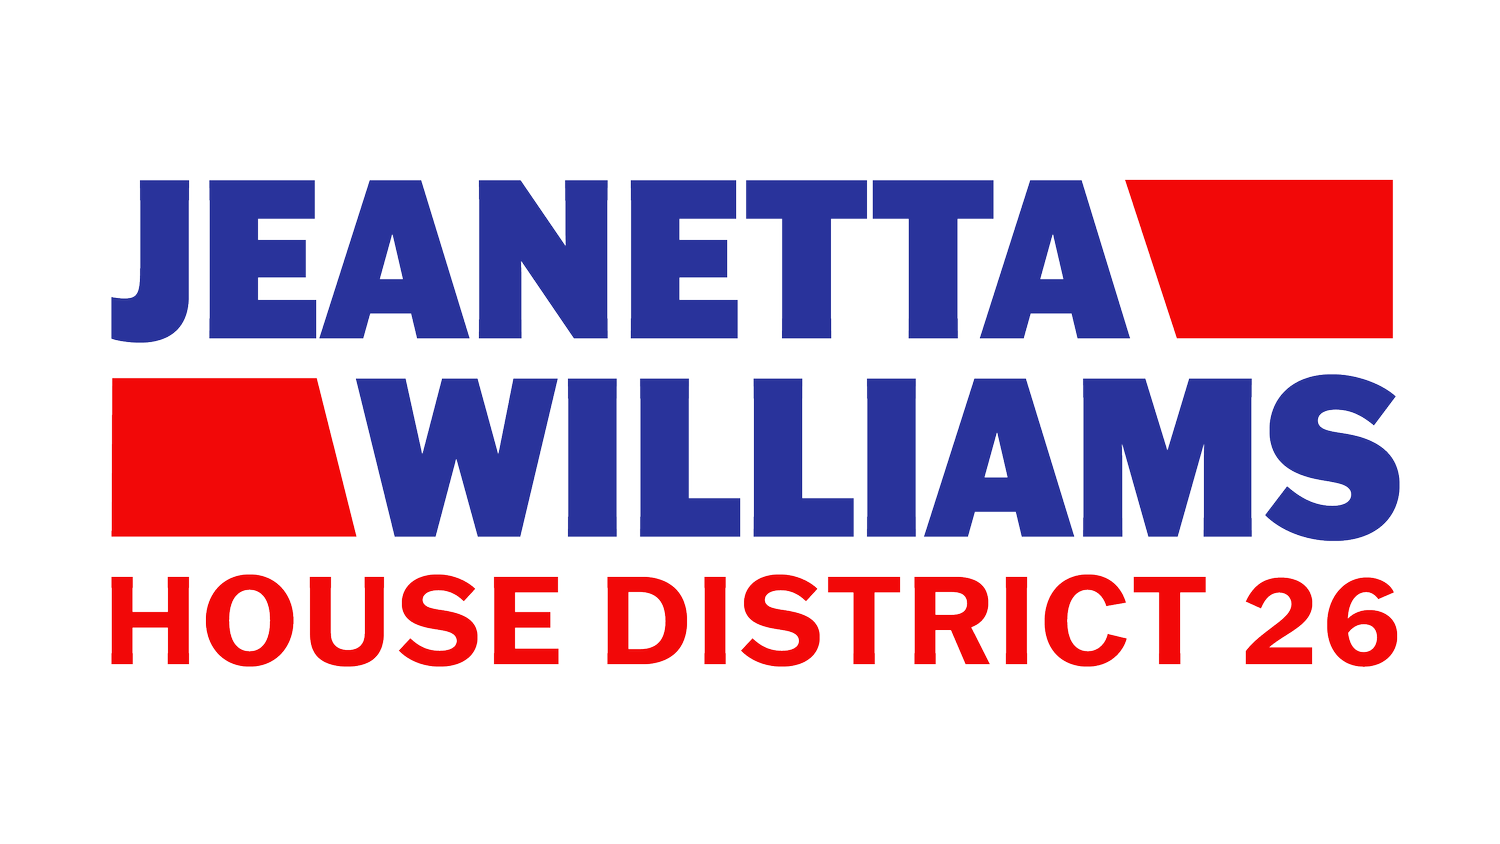 Jeanetta Williams for House District 26